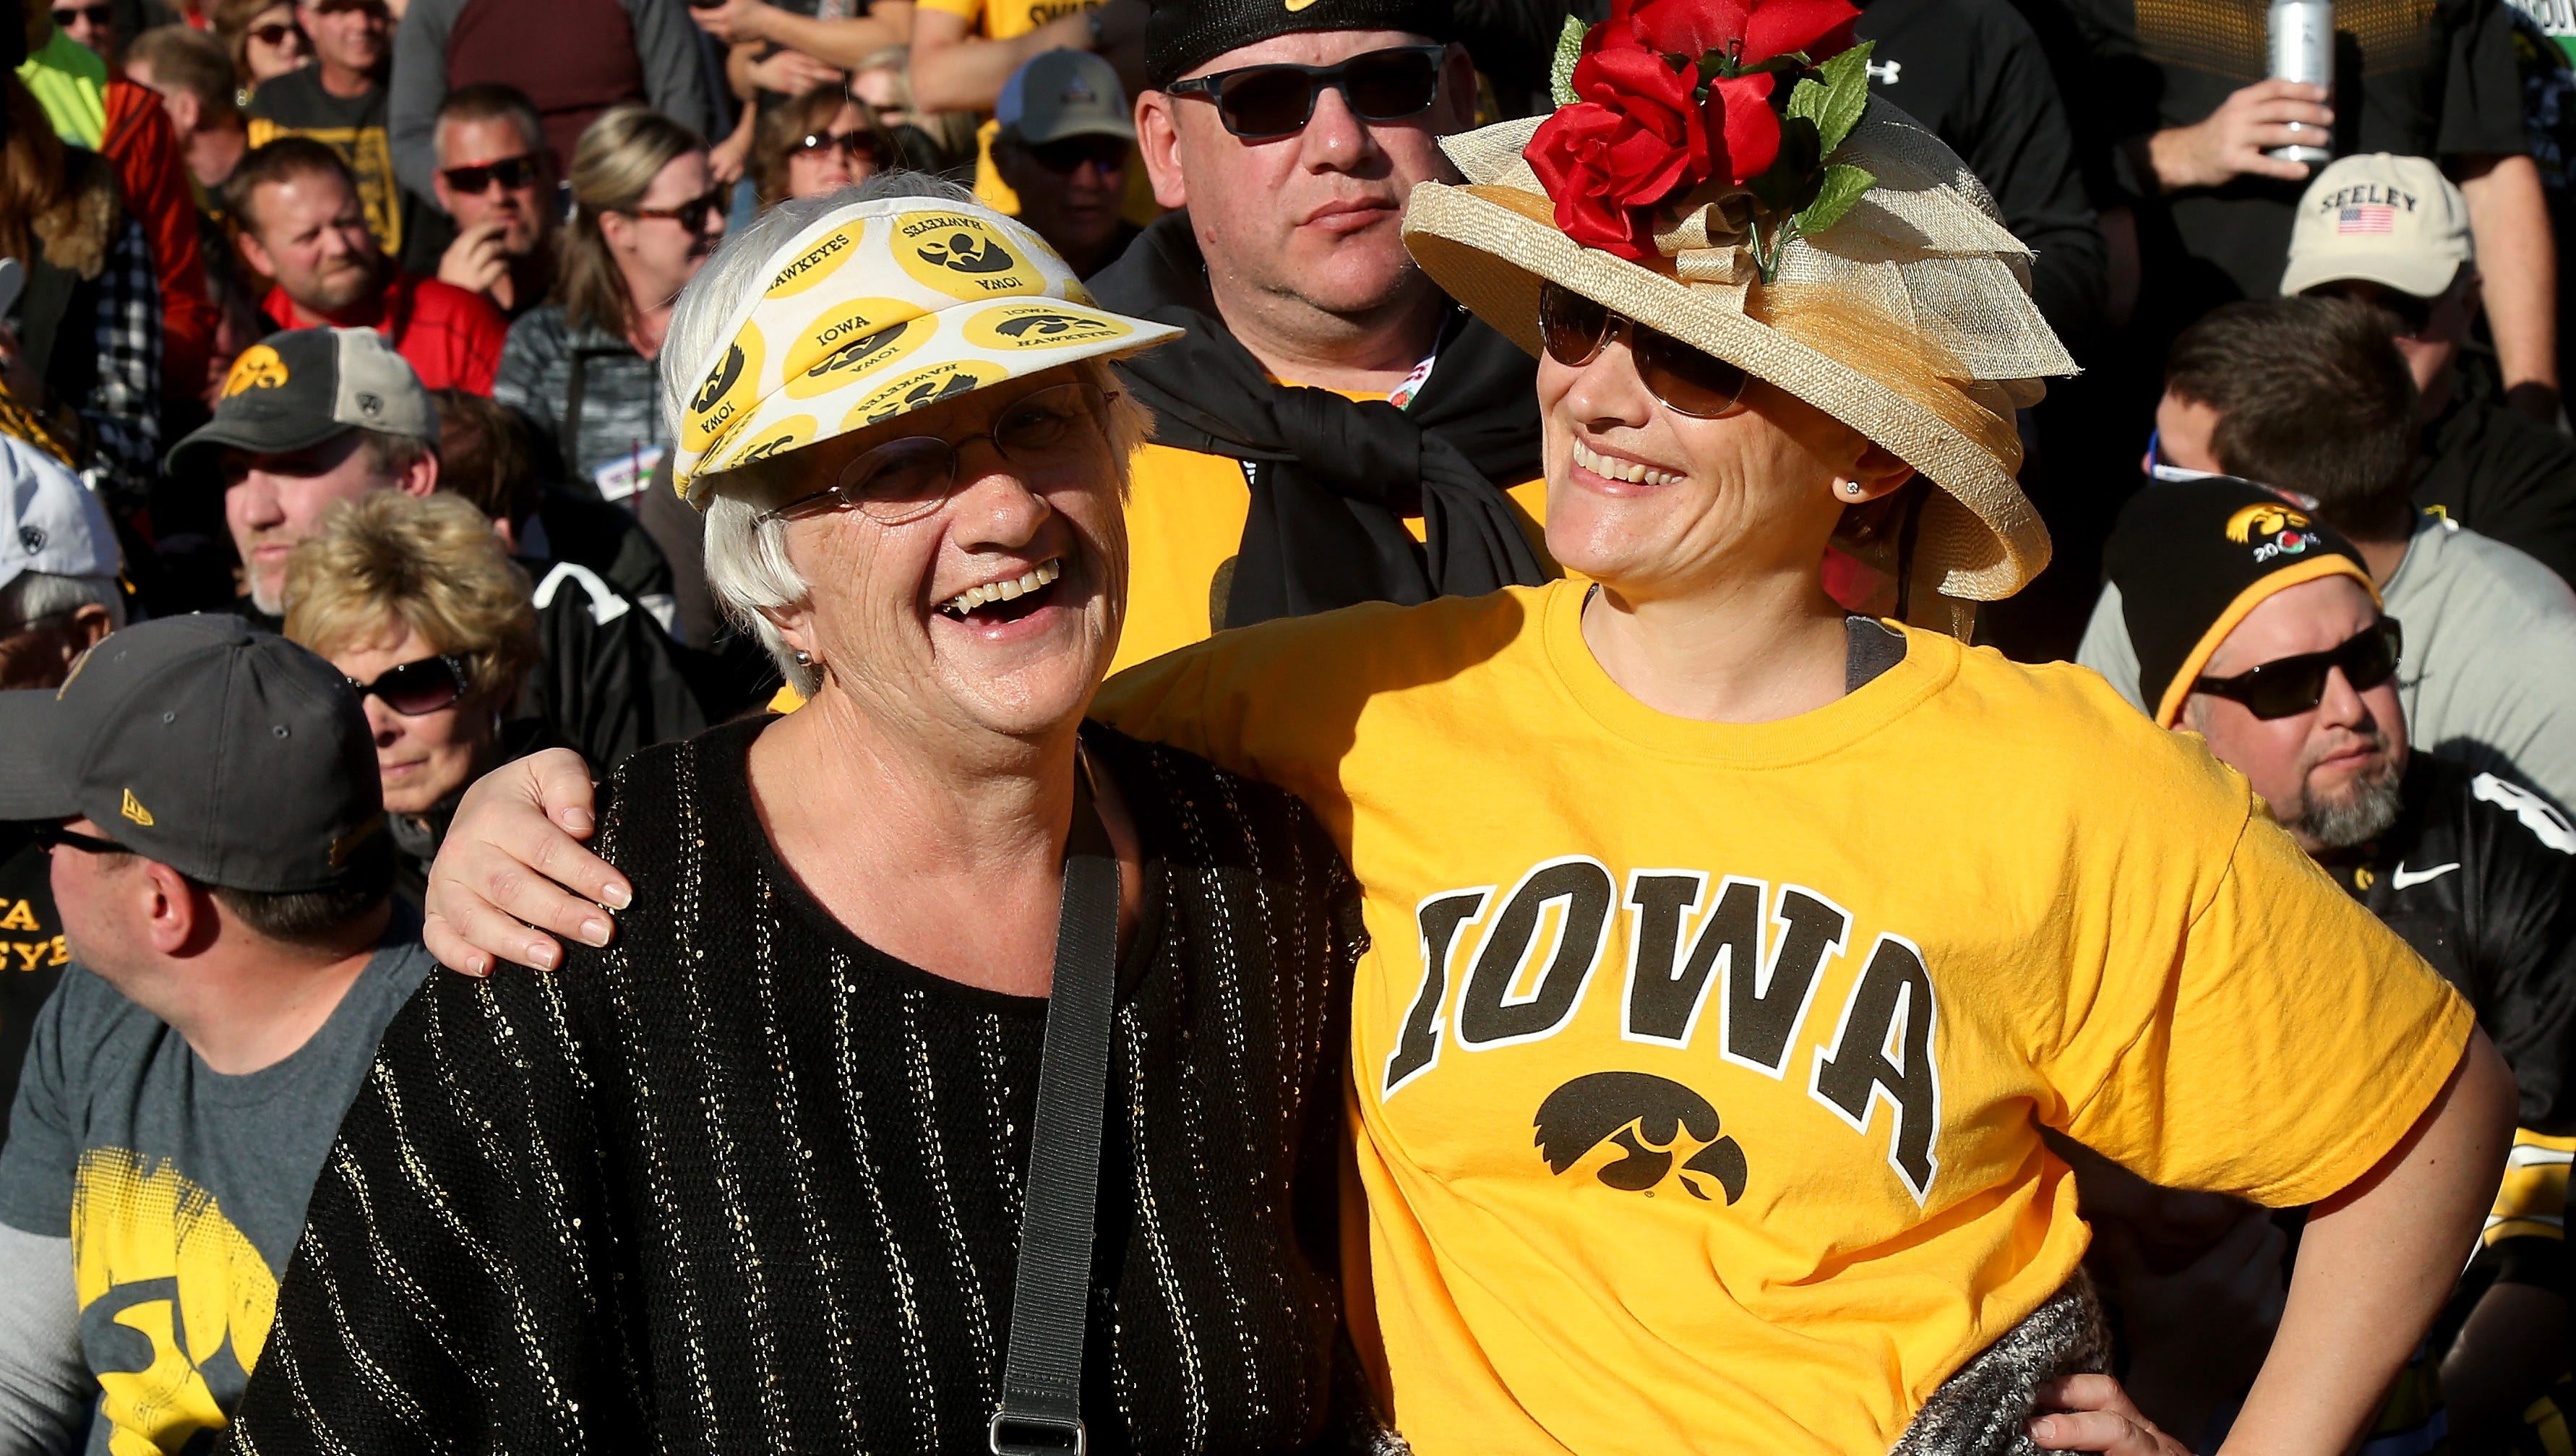 A pair of Iowa fans in the stands during the 102nd Rose Bowl Game between the Stanford Cardinal and the Iowa Hawkeyes on January 1, 2016 at the Rose Bowl in Pasadena, California.